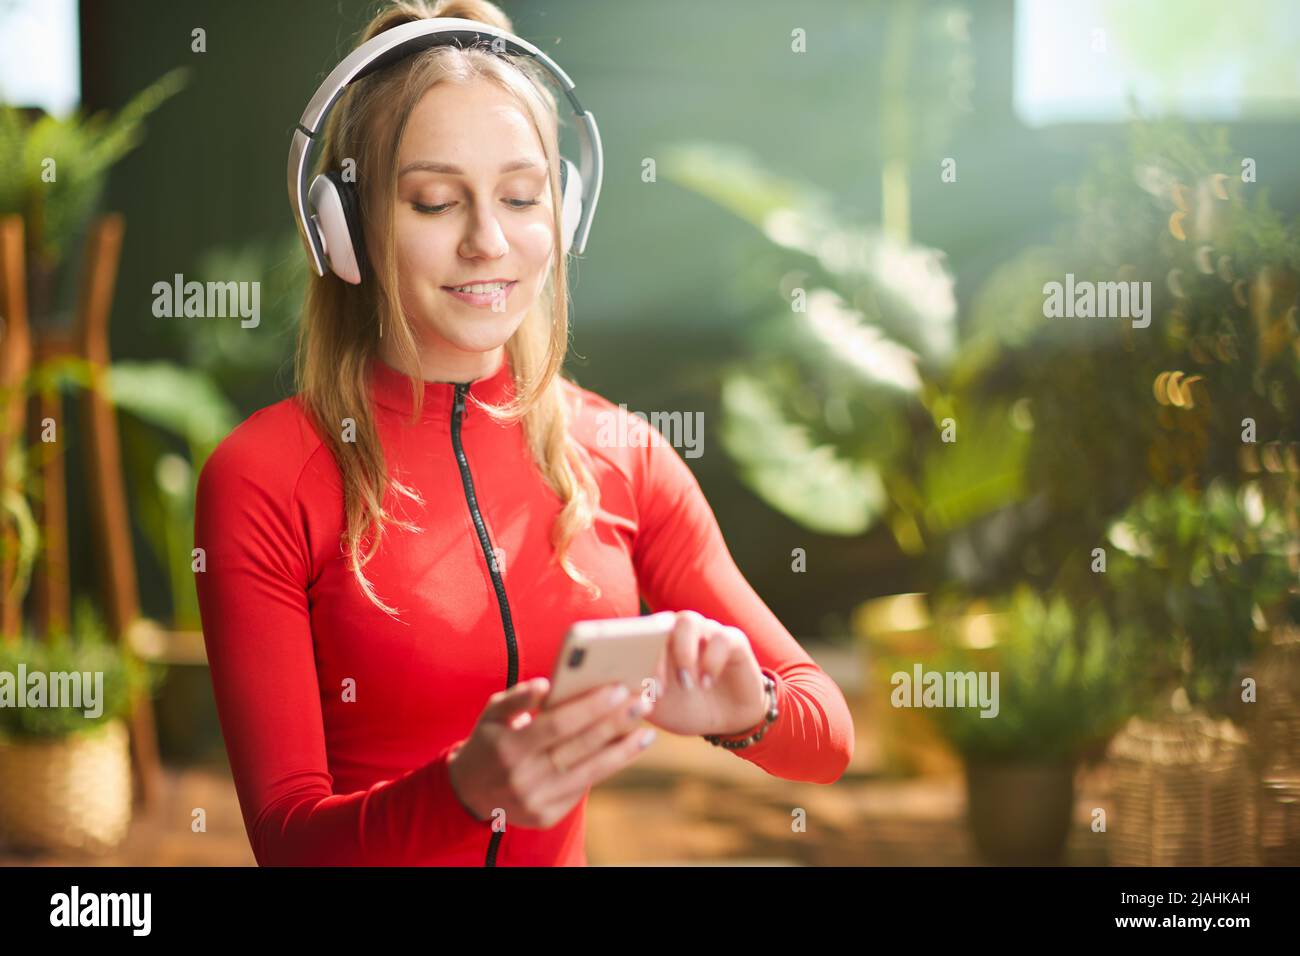 smiling young female in red fitness clothes with headphones using smartphone at modern green home. Stock Photo